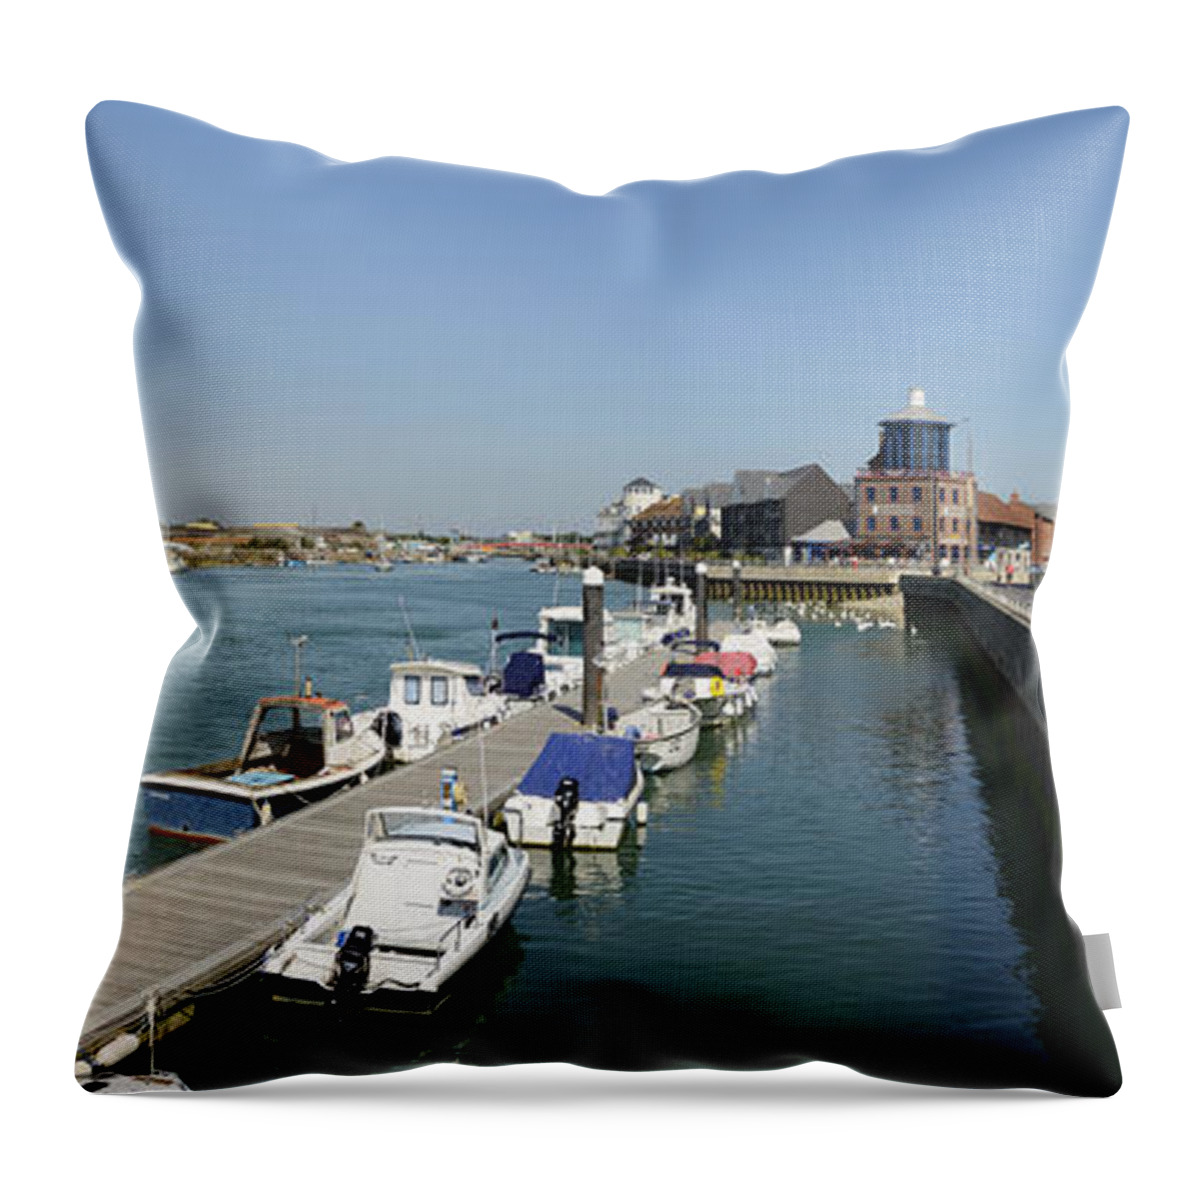 Panoramic Throw Pillow featuring the photograph The River Arun at Littlehampton by Hazy Apple